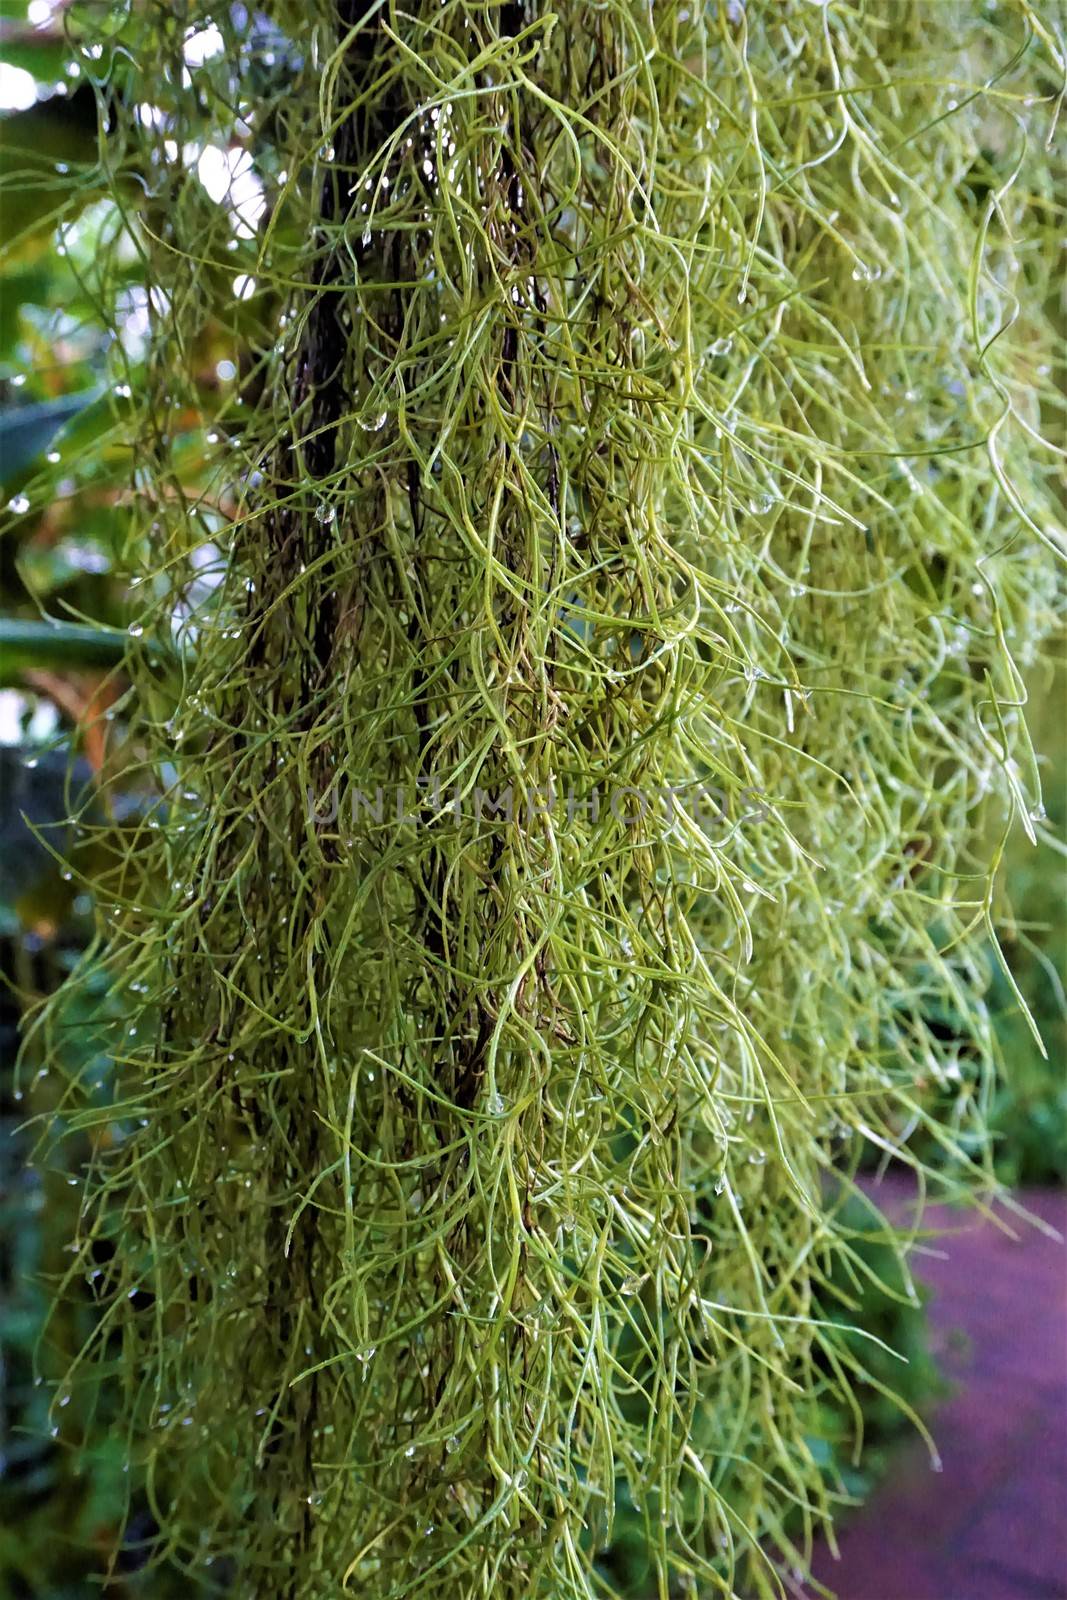 Wet Spanish moss - Tillandsia usneoides - curtain by pisces2386